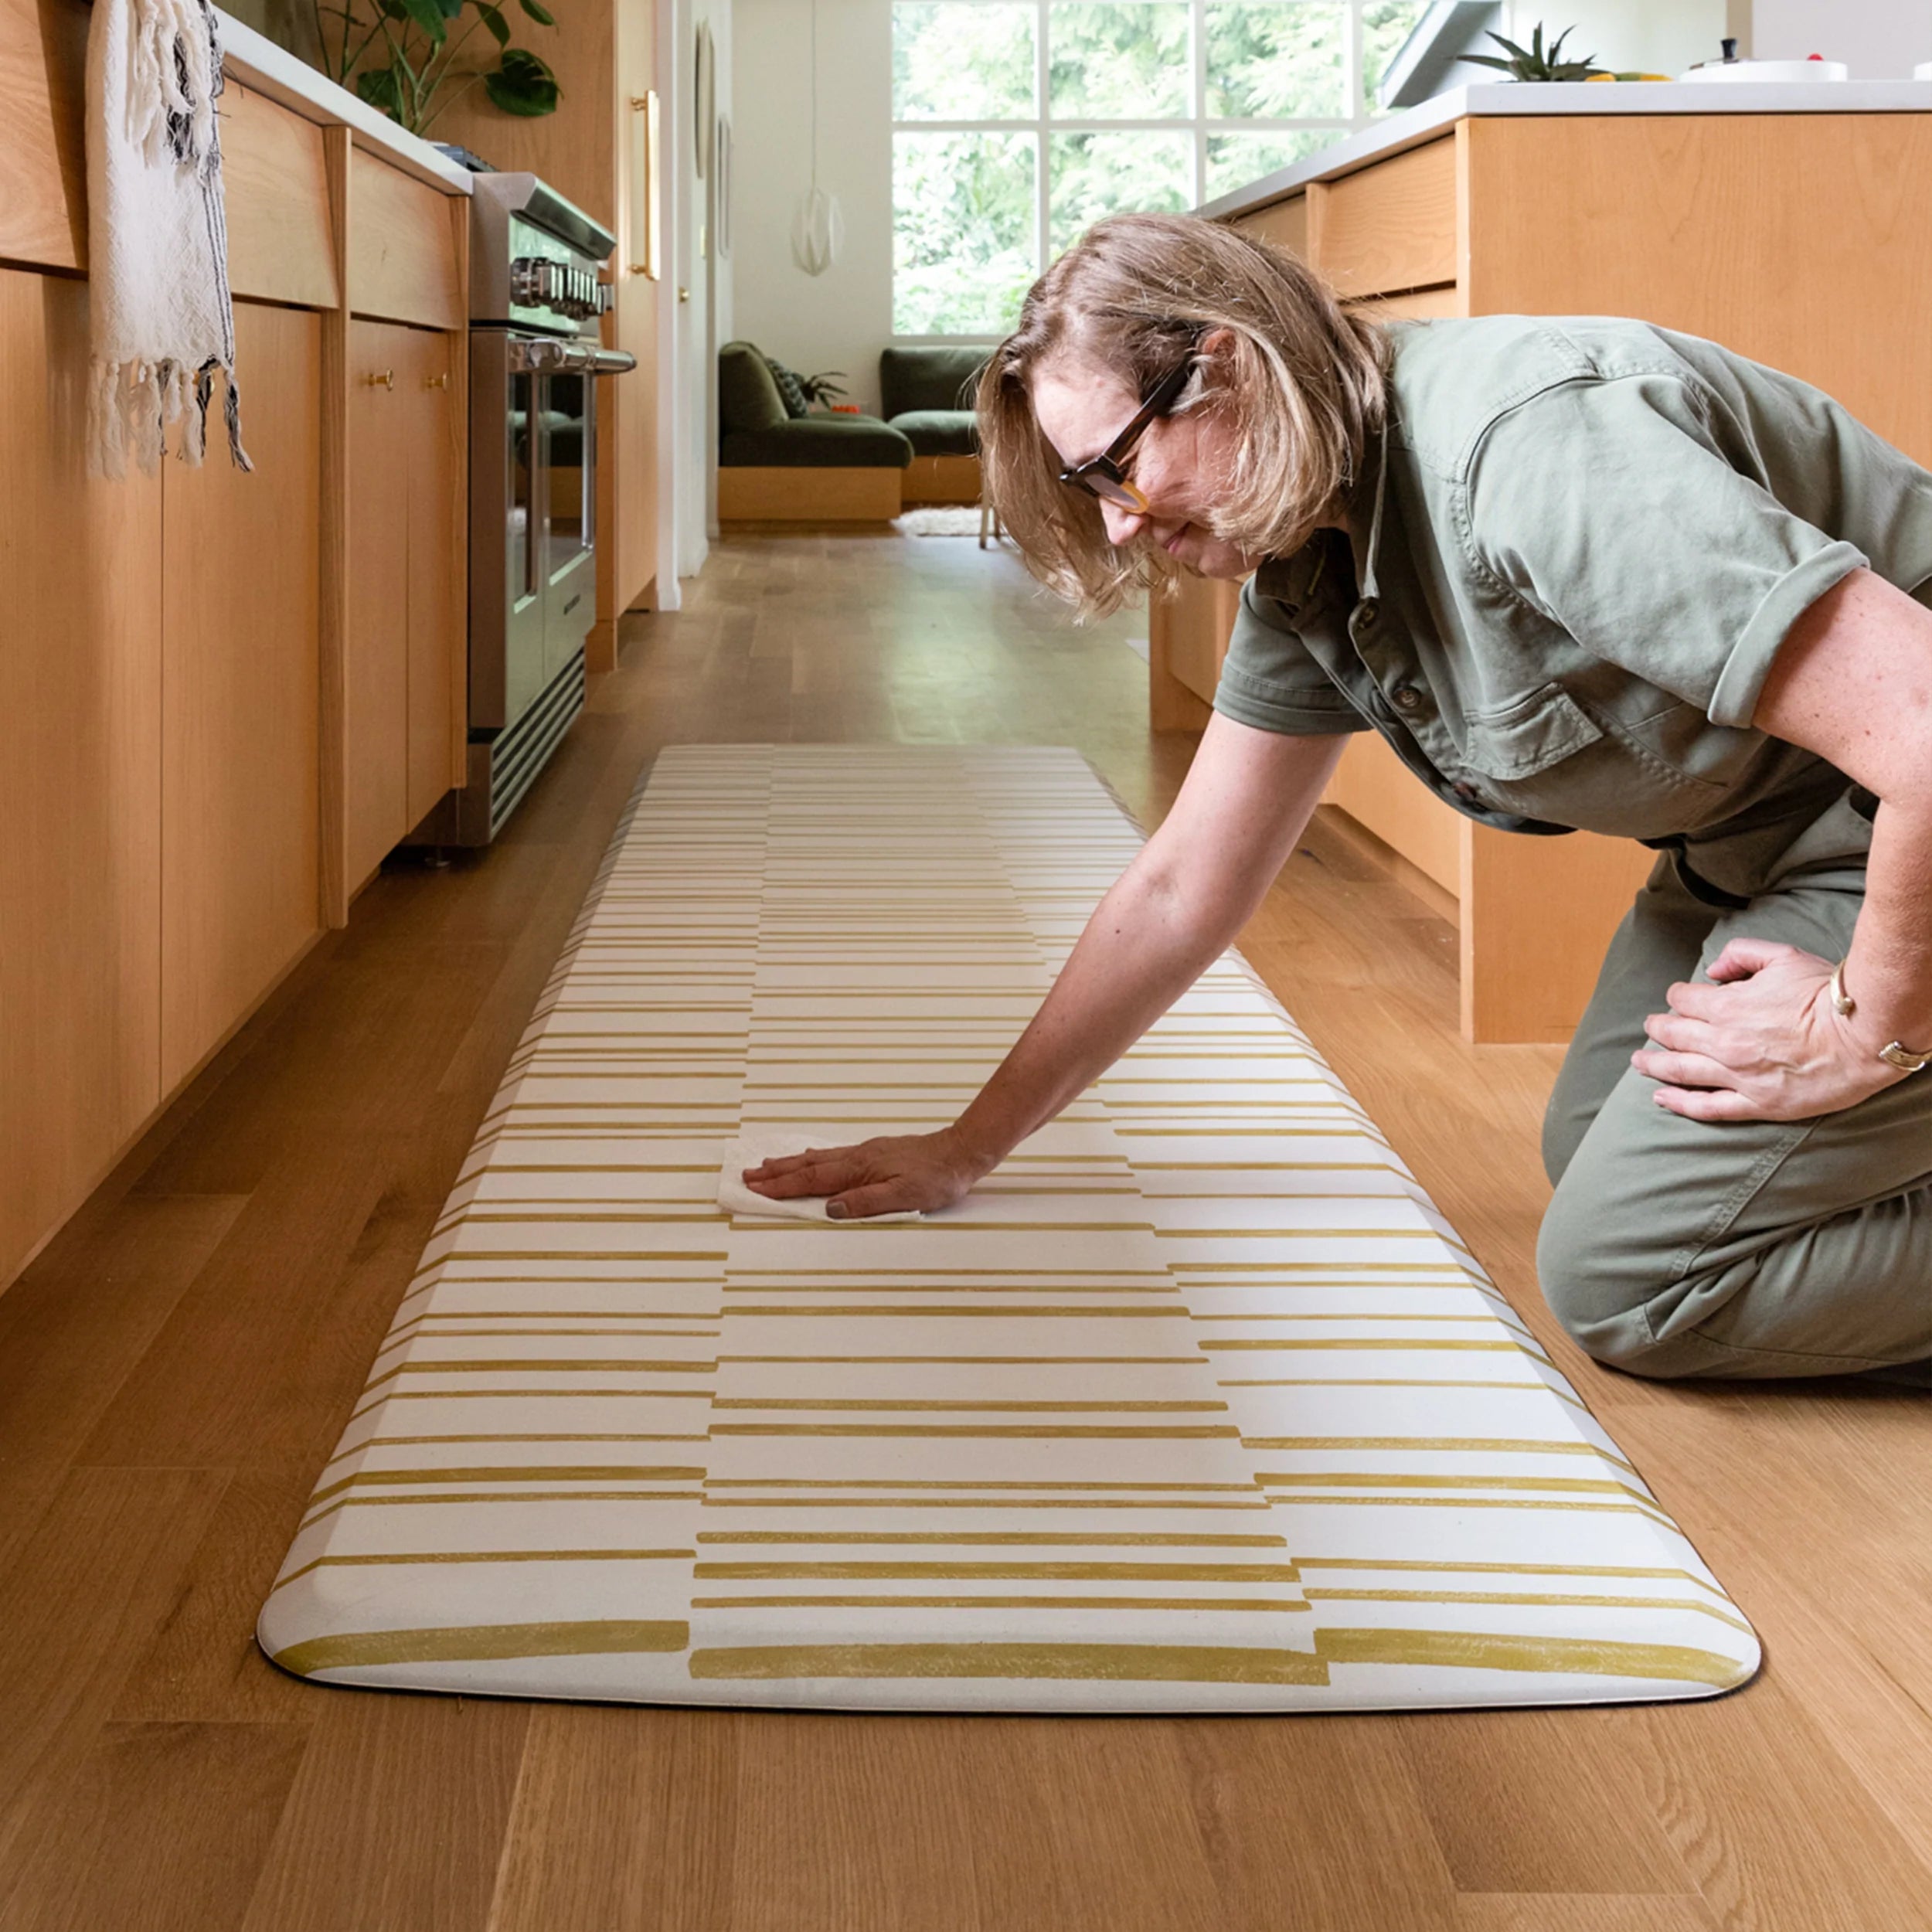 
Easy Wipe Clean Surface
Spill Proof
Unlike fabric alternatives, there’s no need to launder these mats. Instead, wipe clean with your favorite all purpose cleaner or mild dish soap and dry with a cloth.
